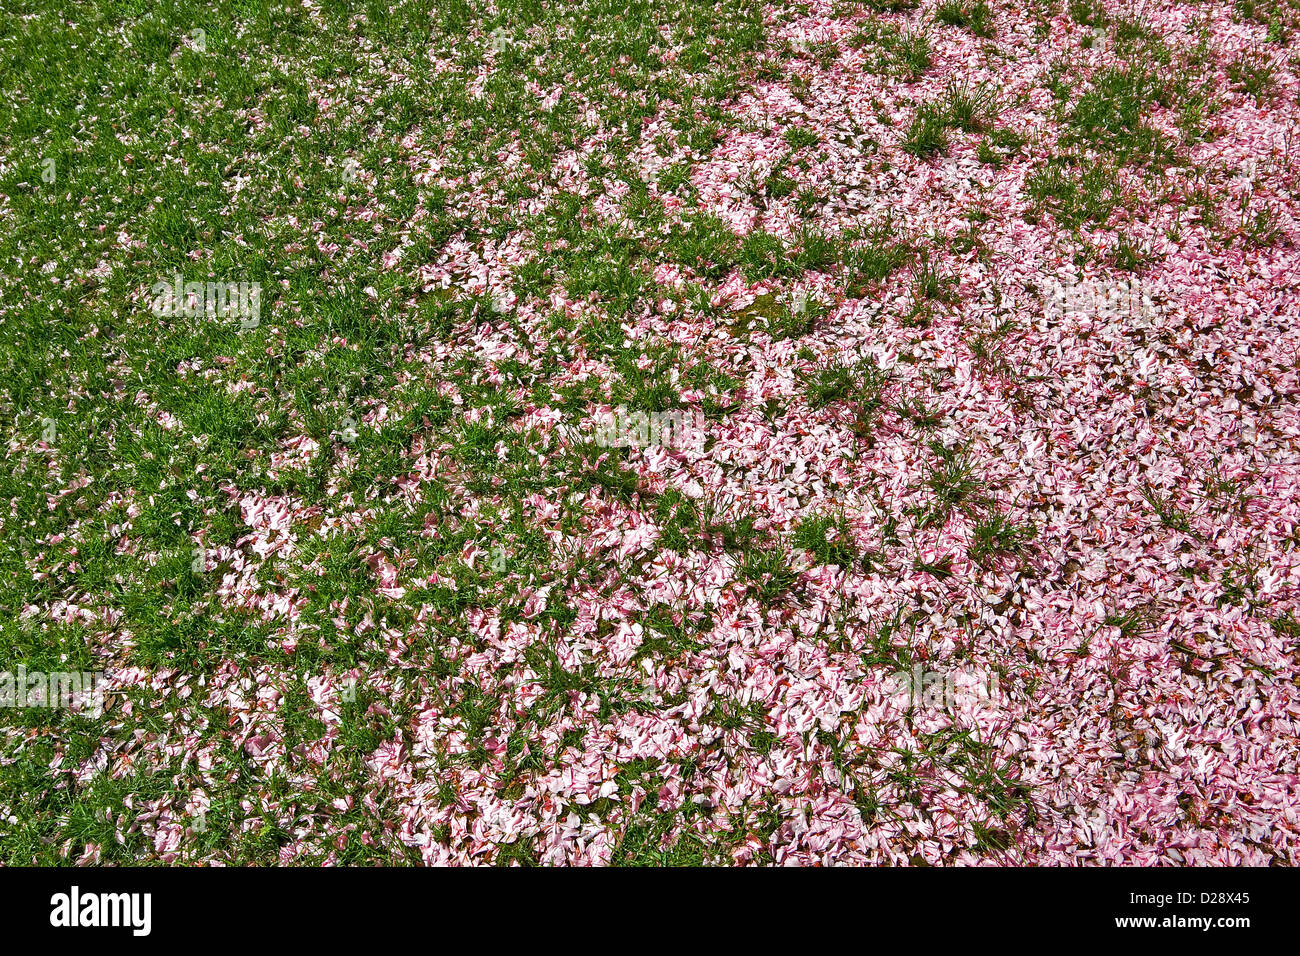 petals on the grass Stock Photo